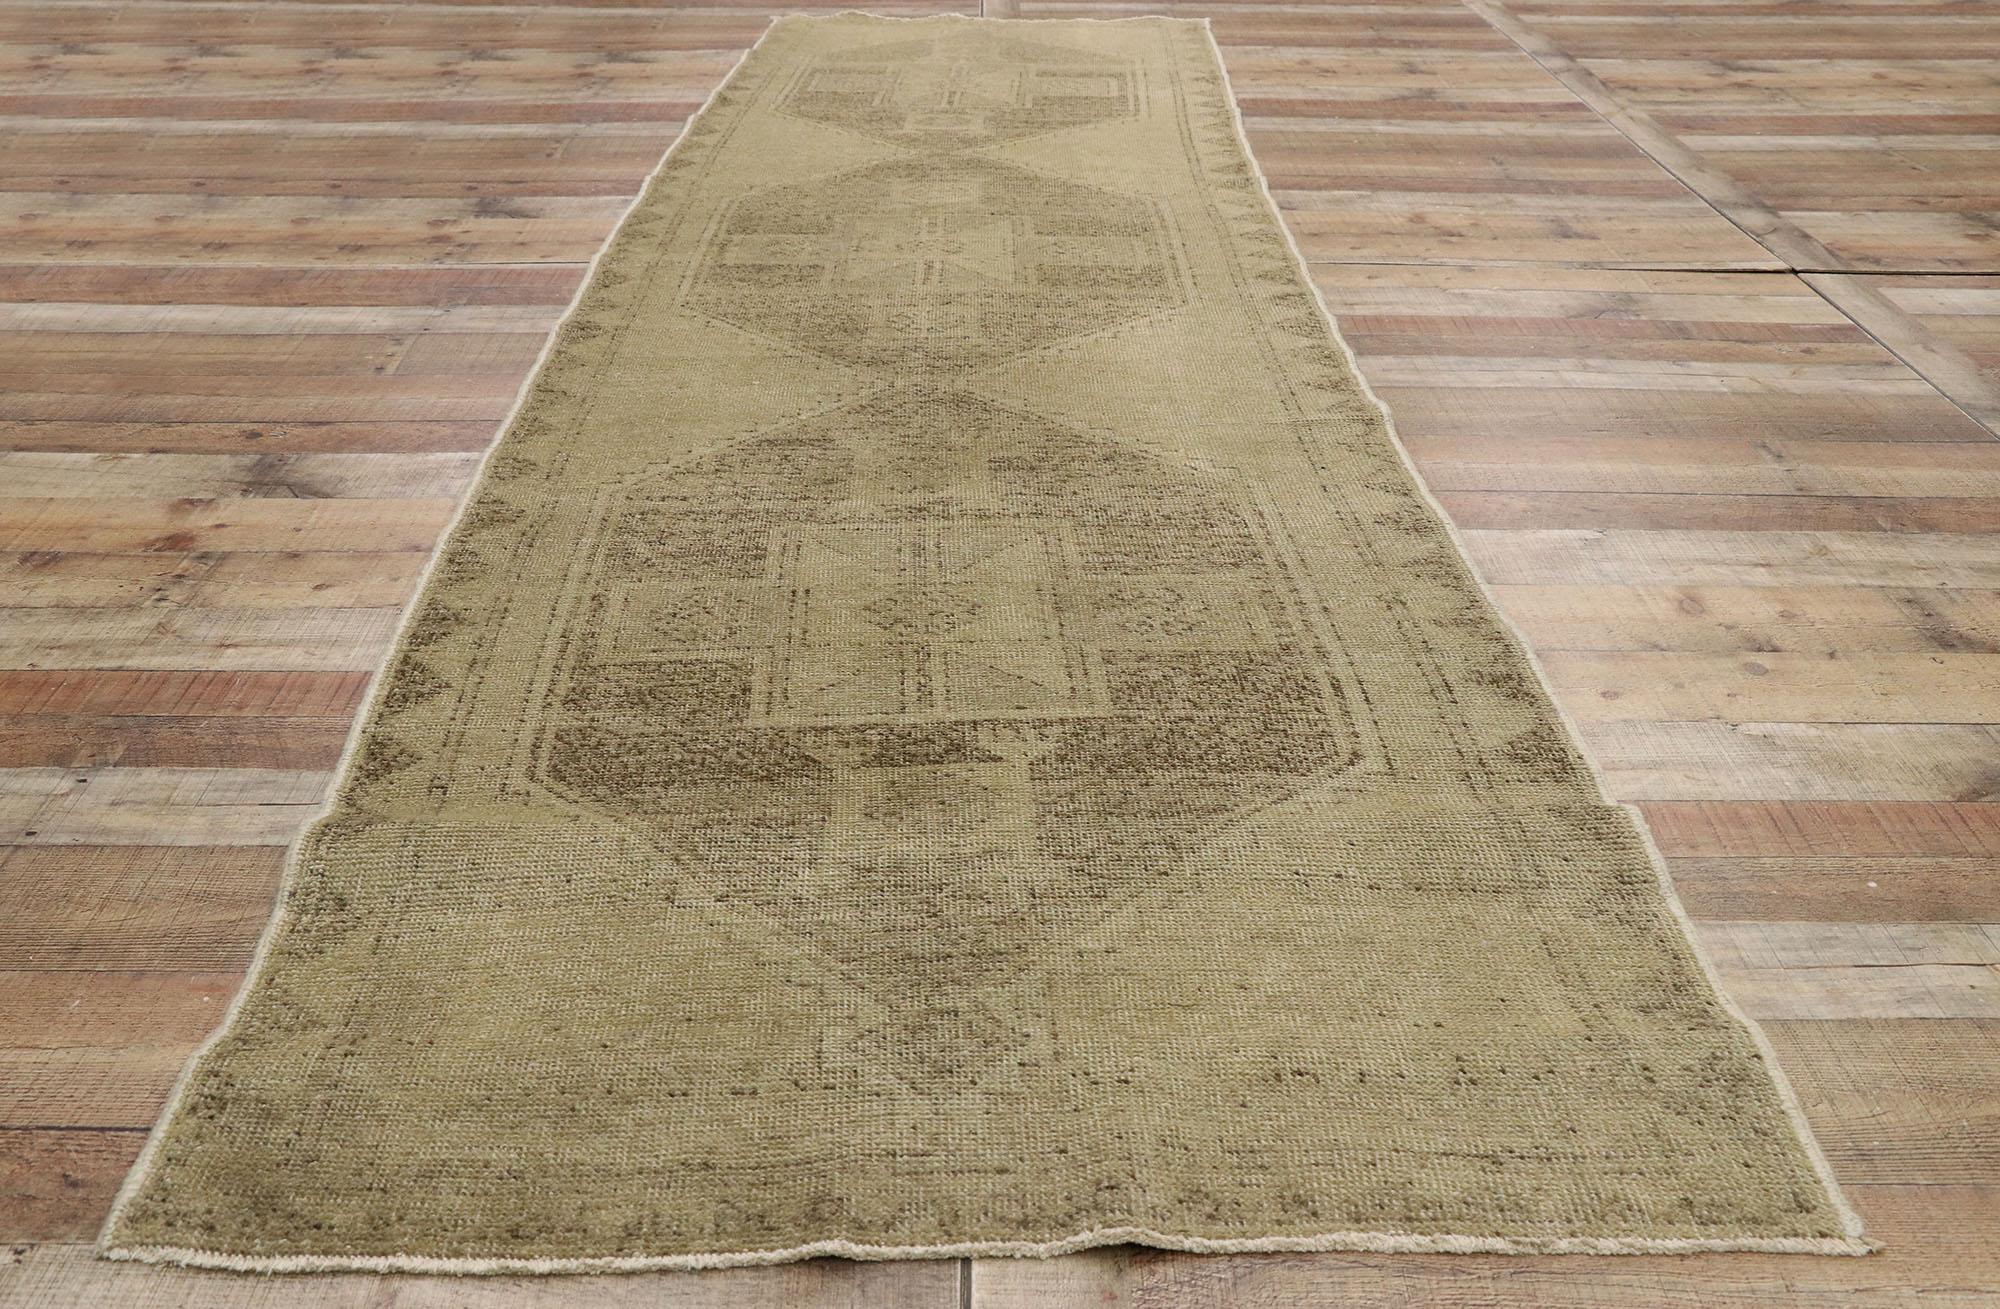 Turkish Oushak Carpet Runner with Shaker Style and Muted 'Washed Out' Colors For Sale 3